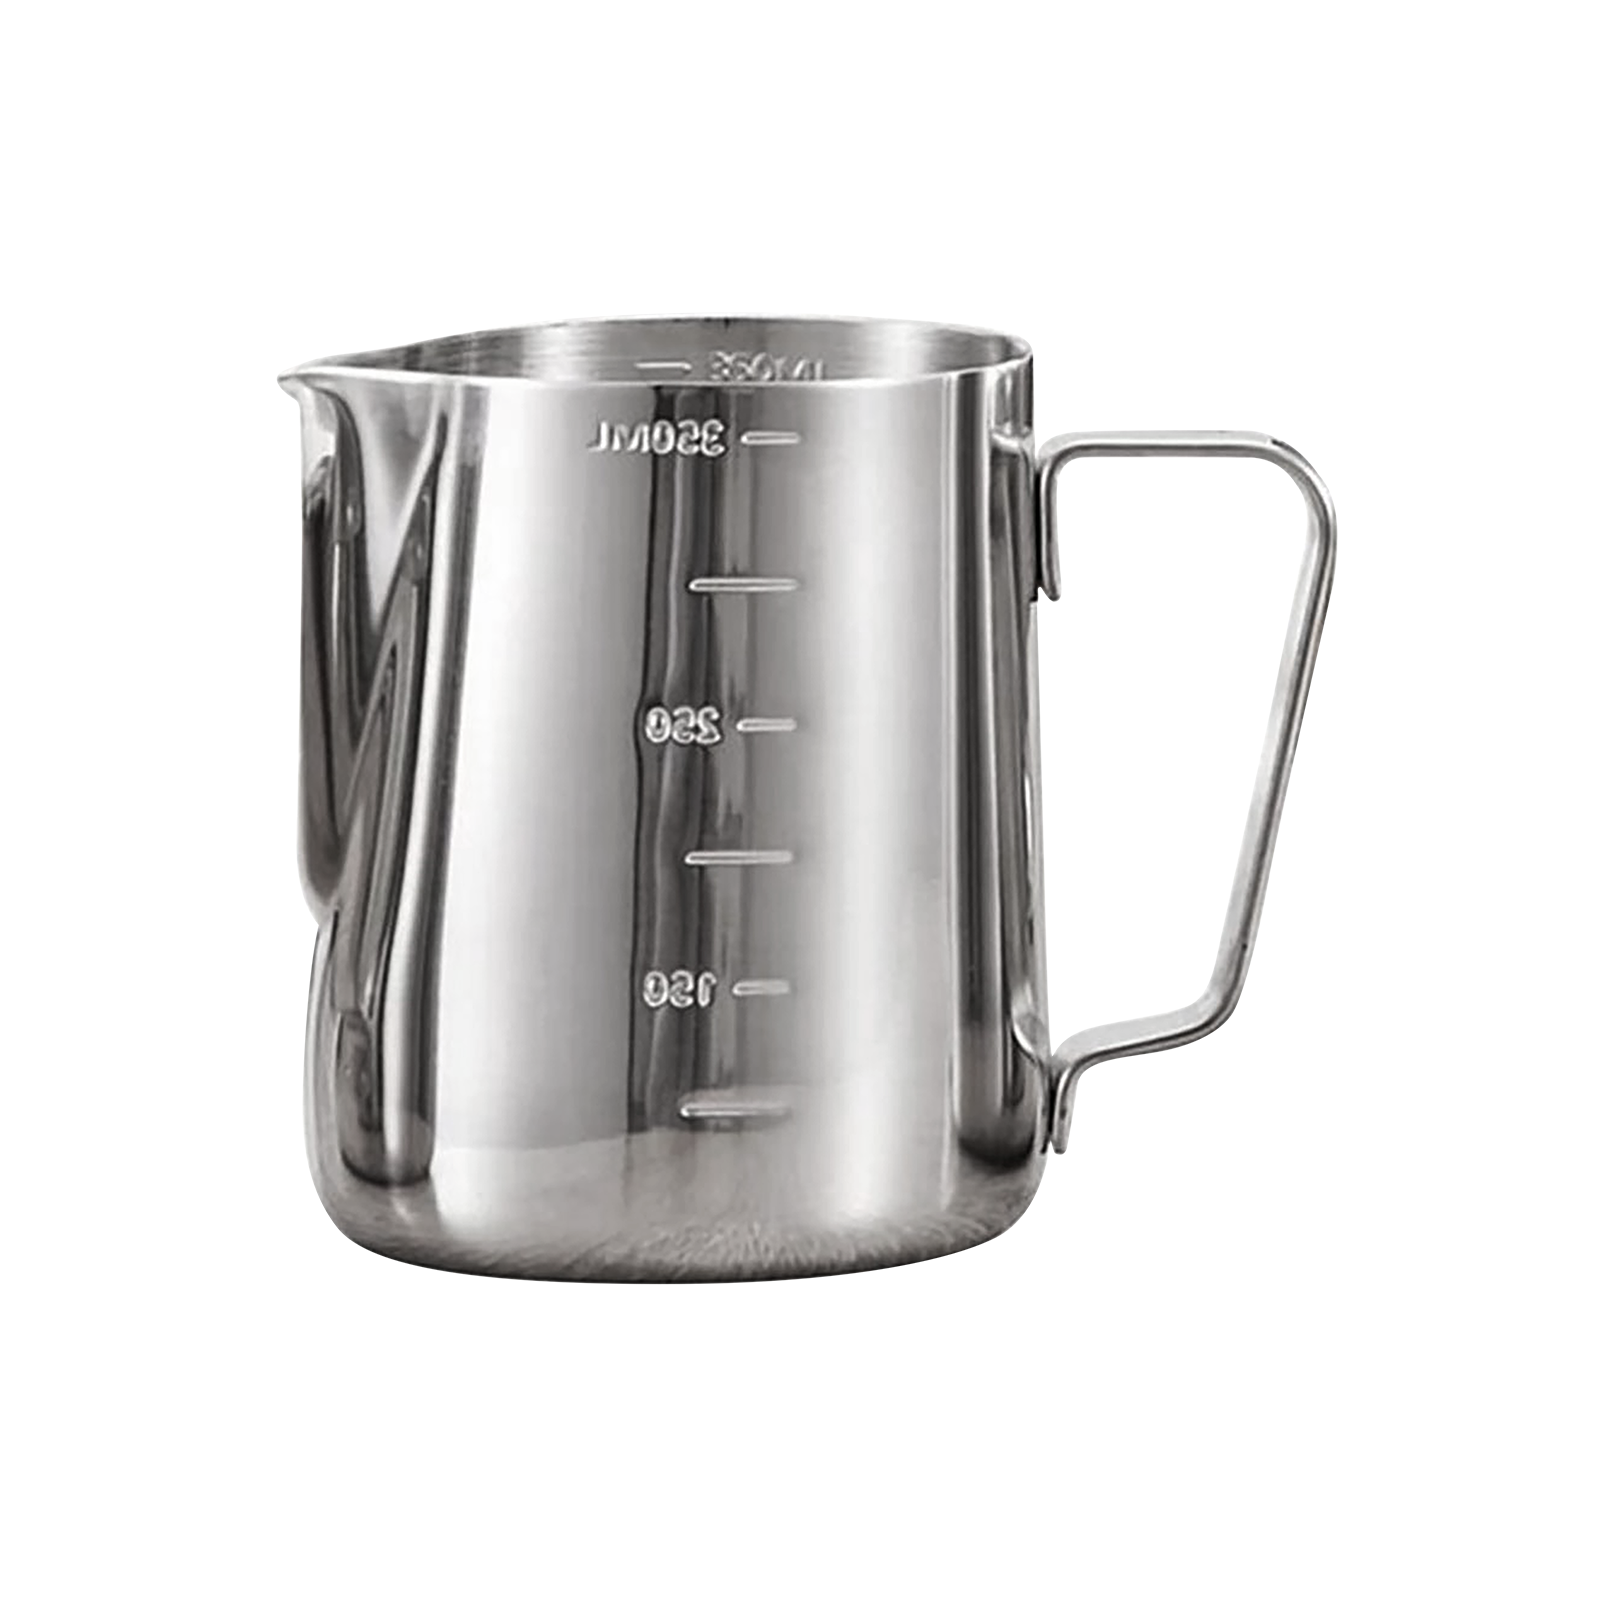 Giselle Stainless Steel 350ml Milk Frothing Pitcher for Espresso Coffee Maker with/ without Thermometer (CFC0002 / CFC0002TS)